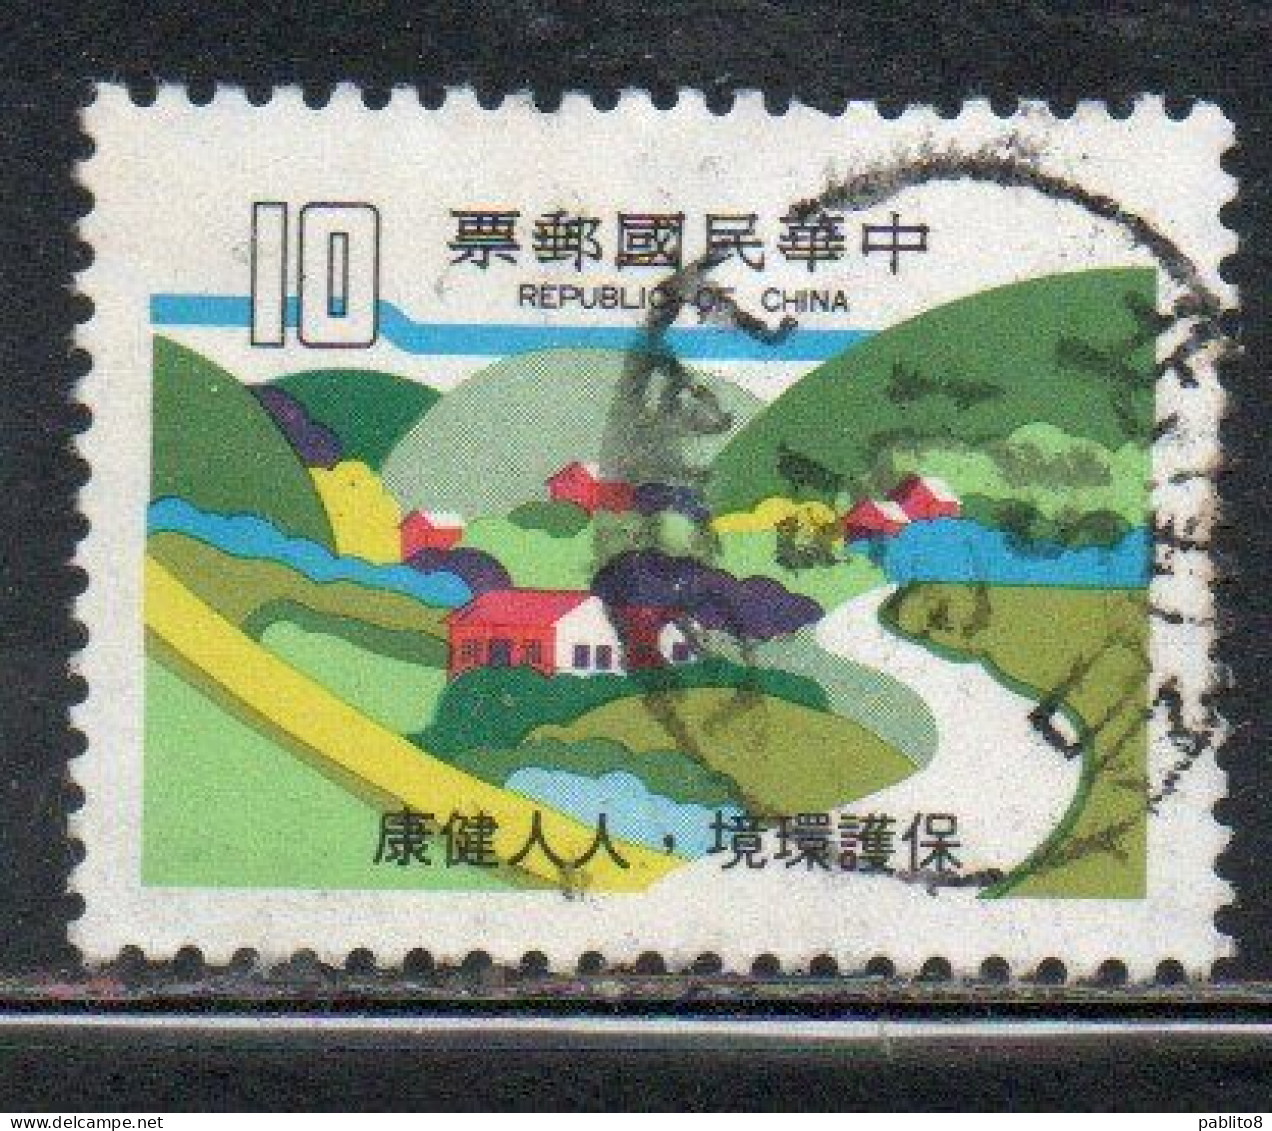 CHINA REPUBLIC CINA TAIWAN FORMOSA 1979 PROTECTION OF THE ENVIRONMENT RURAL LANDSCAPE 10$ USED USATO OBLITERE' - Gebraucht